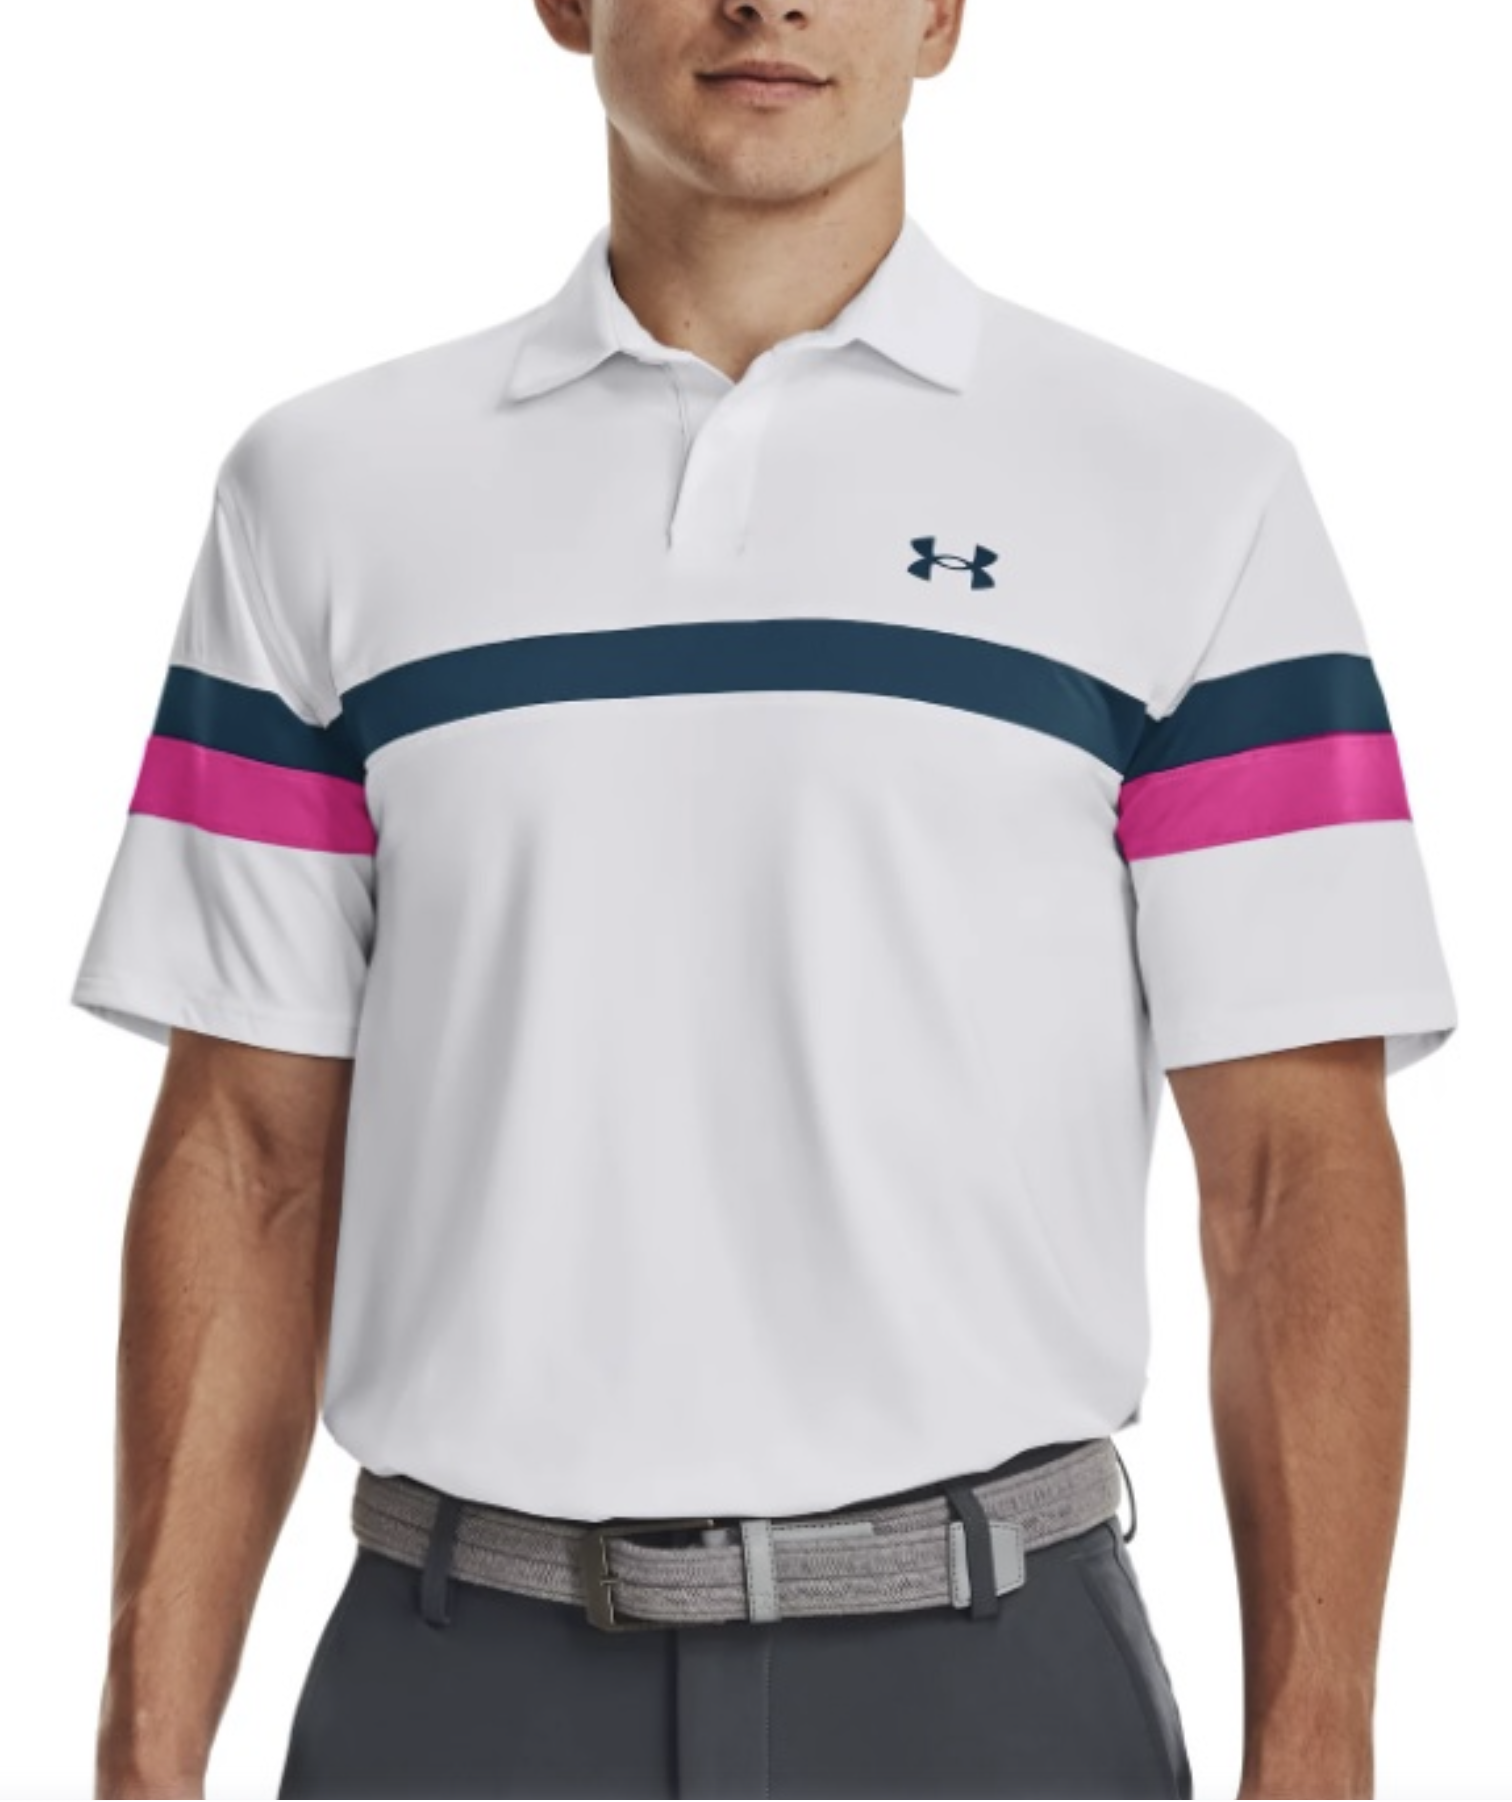 Under Armour | 1377379-100 | Blocked Polo | White | Rebel Pink | Static